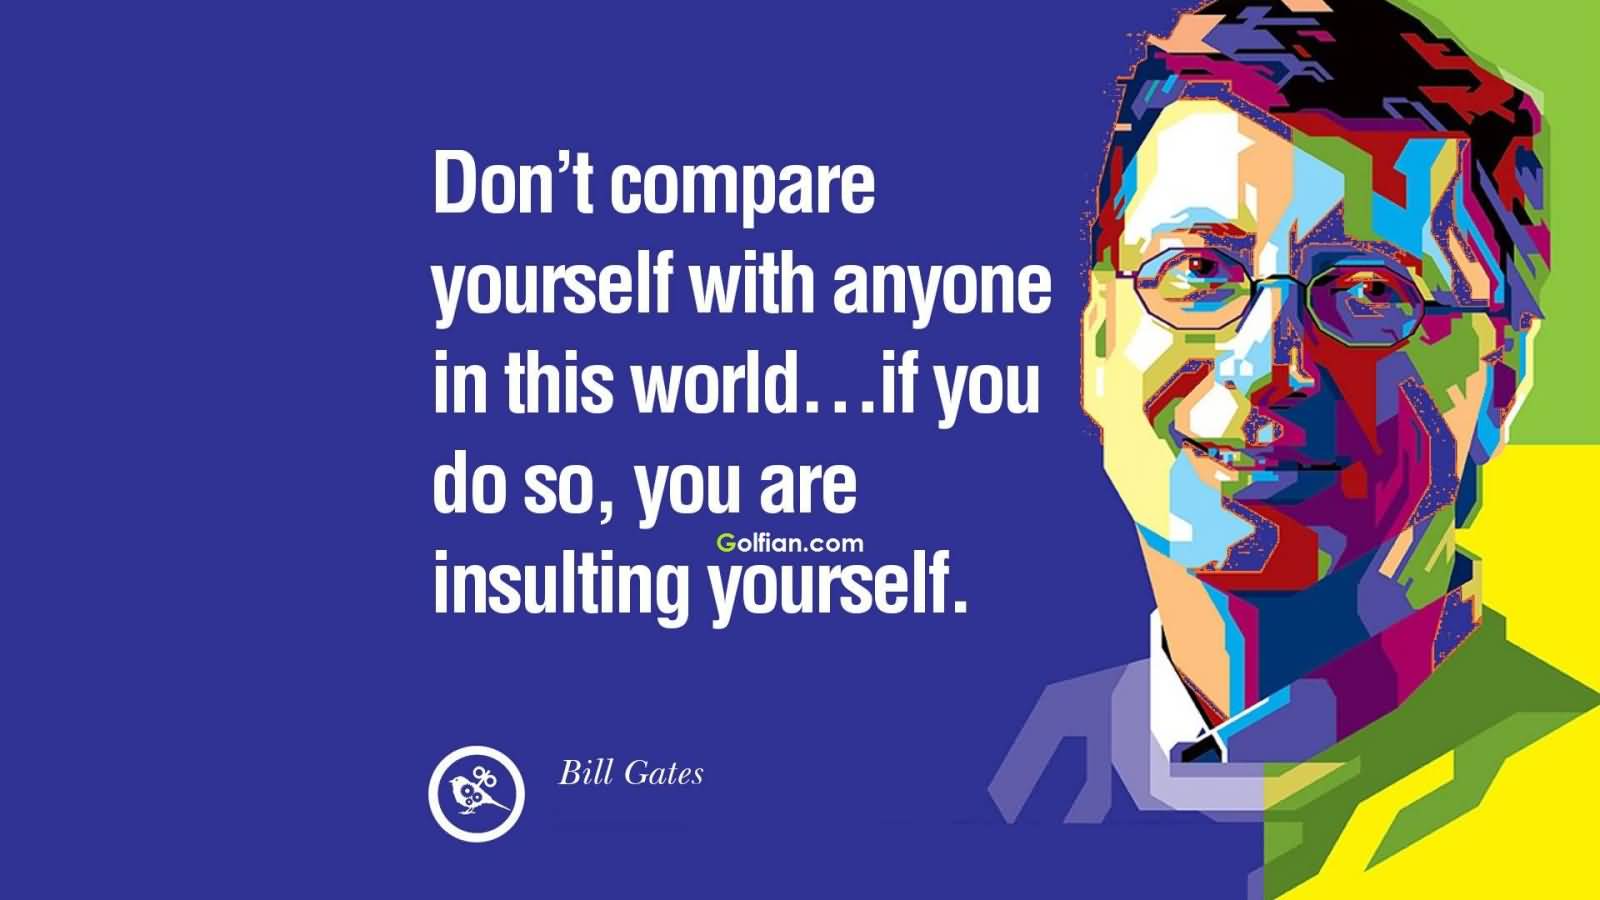 Don’t compare yourself with anyone in this world…if you do so, you are insulting yourself. Bill Gates